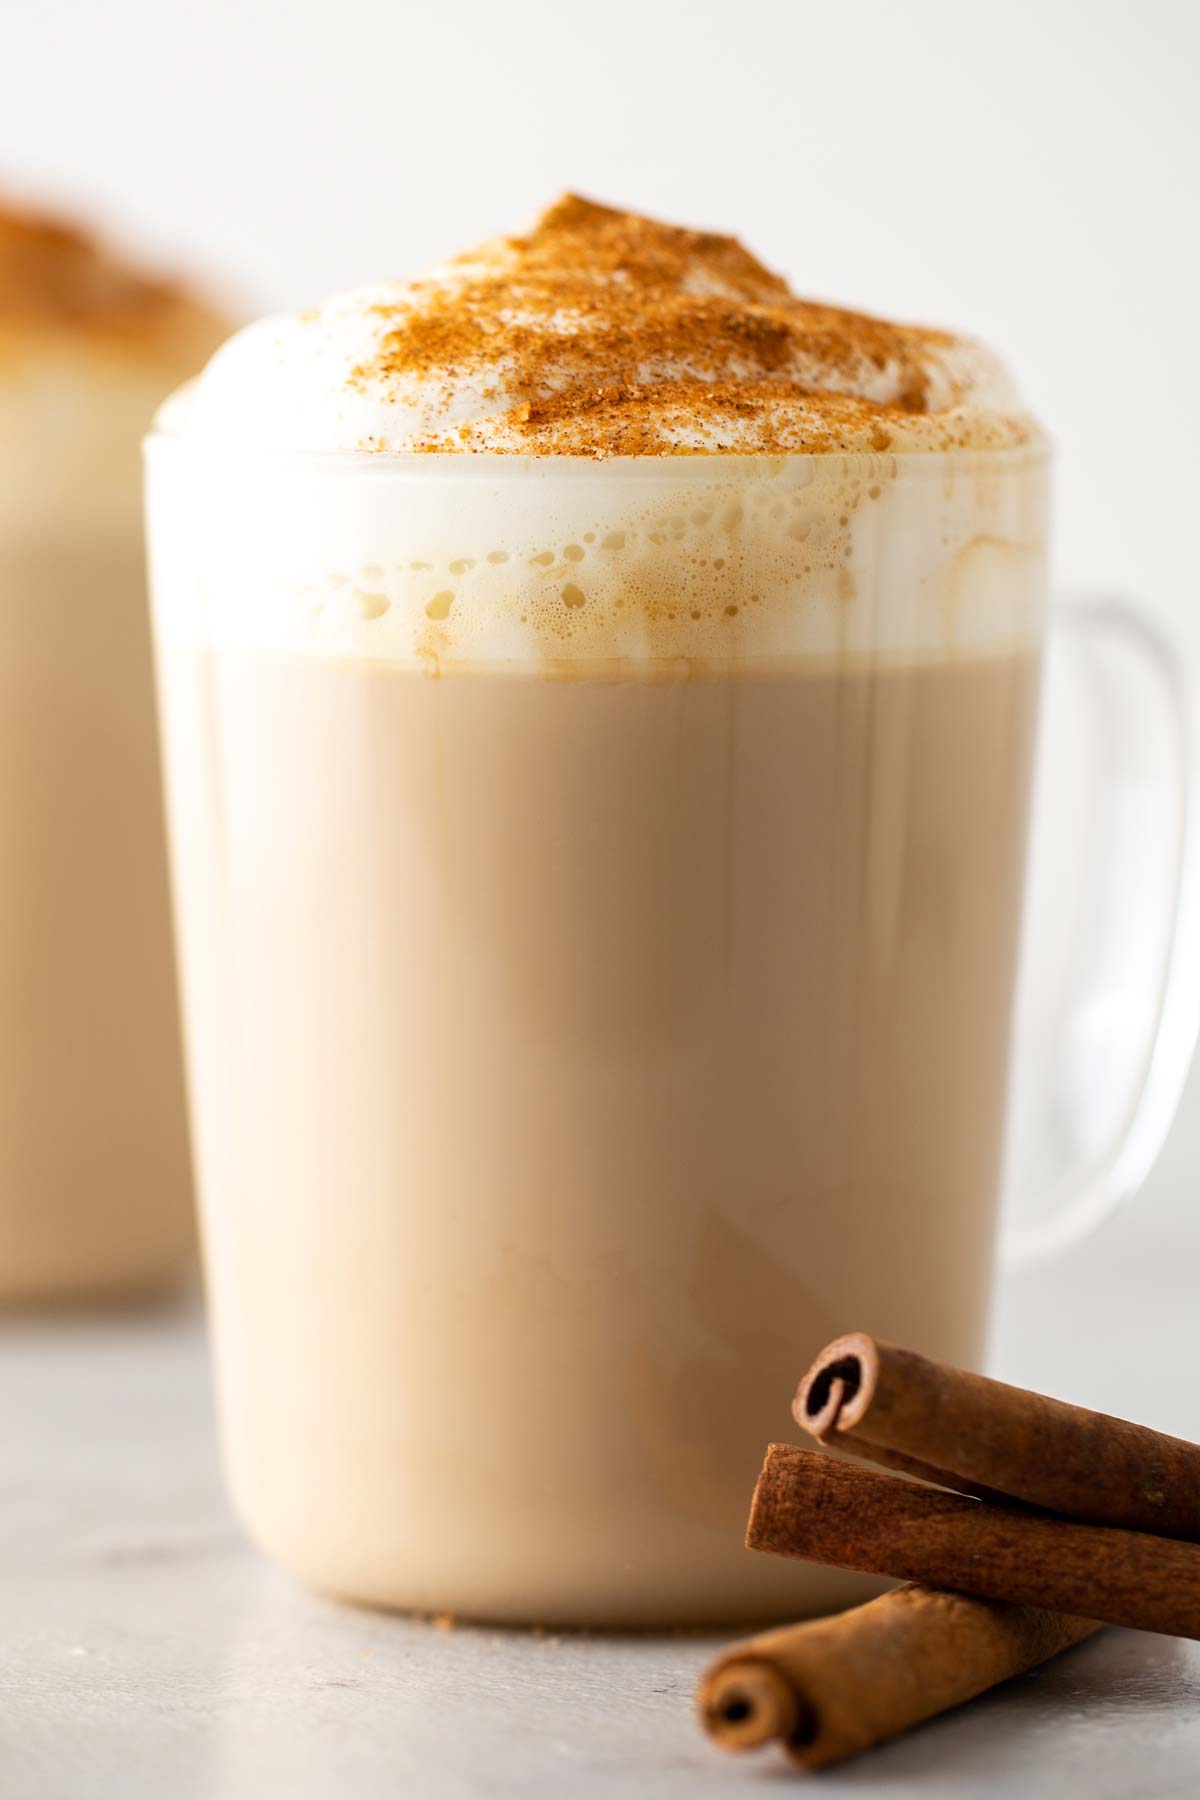 Starbucks Cinnamon Dolce Latte copycat drink in a glass mug with whipped cream and cinnamon topping.